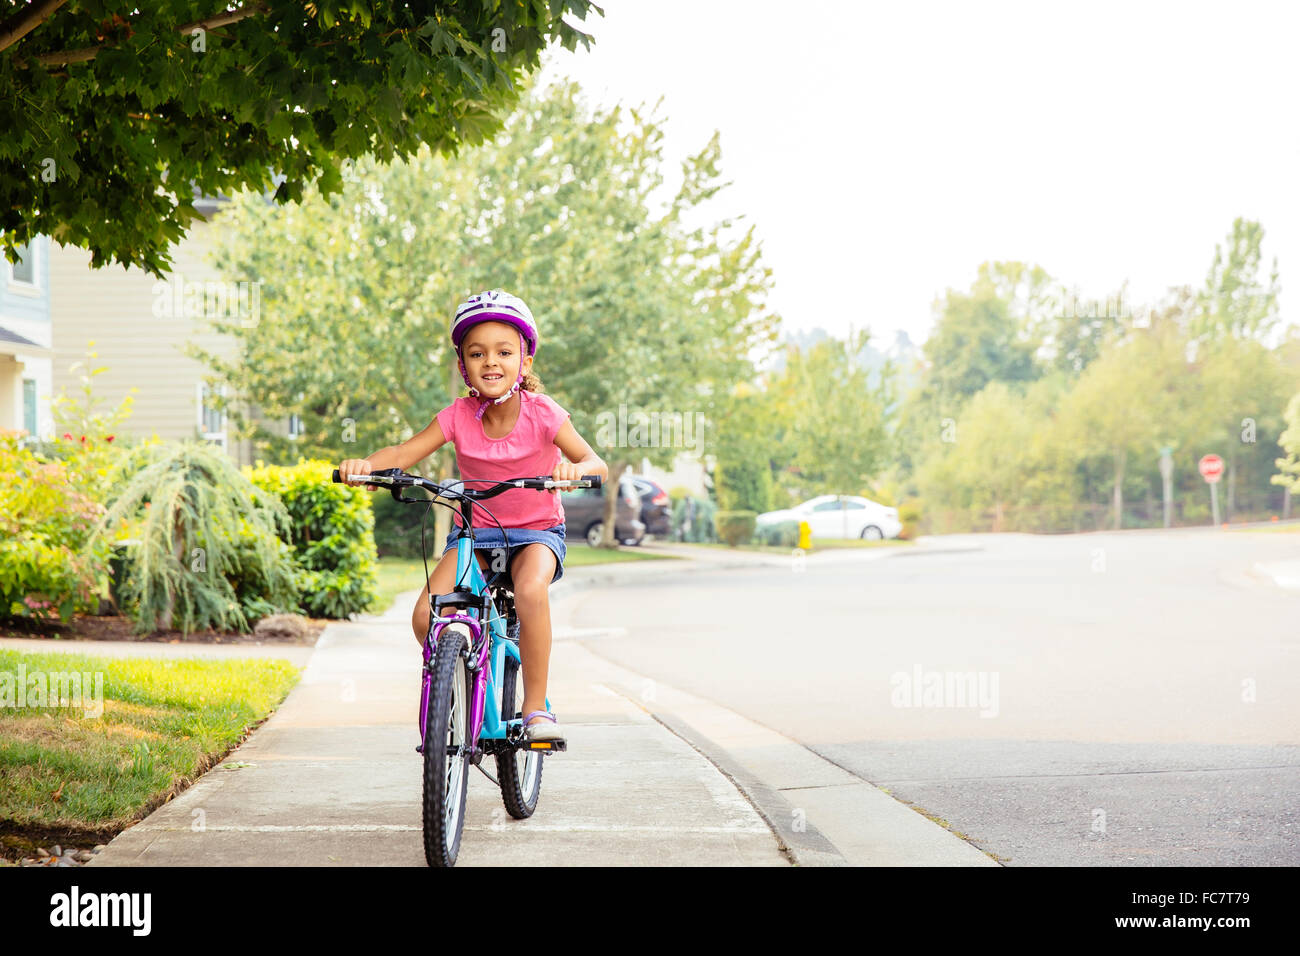 Mixed Race girl riding bicycle on sidewalk Banque D'Images